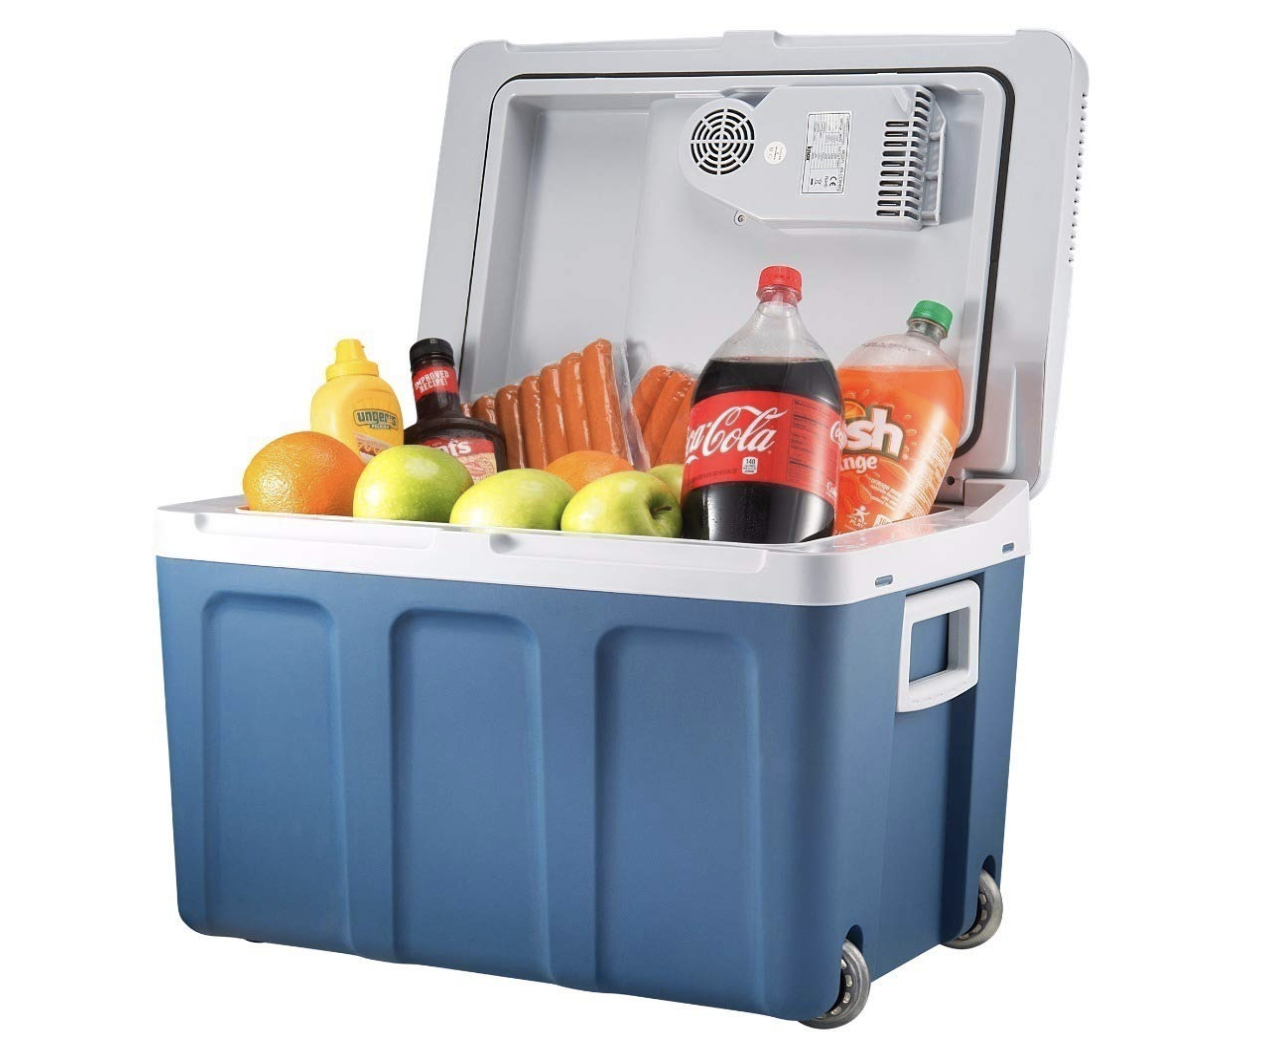 7. Knox Electric Cooler and Warmer For Car and Home With Wheels